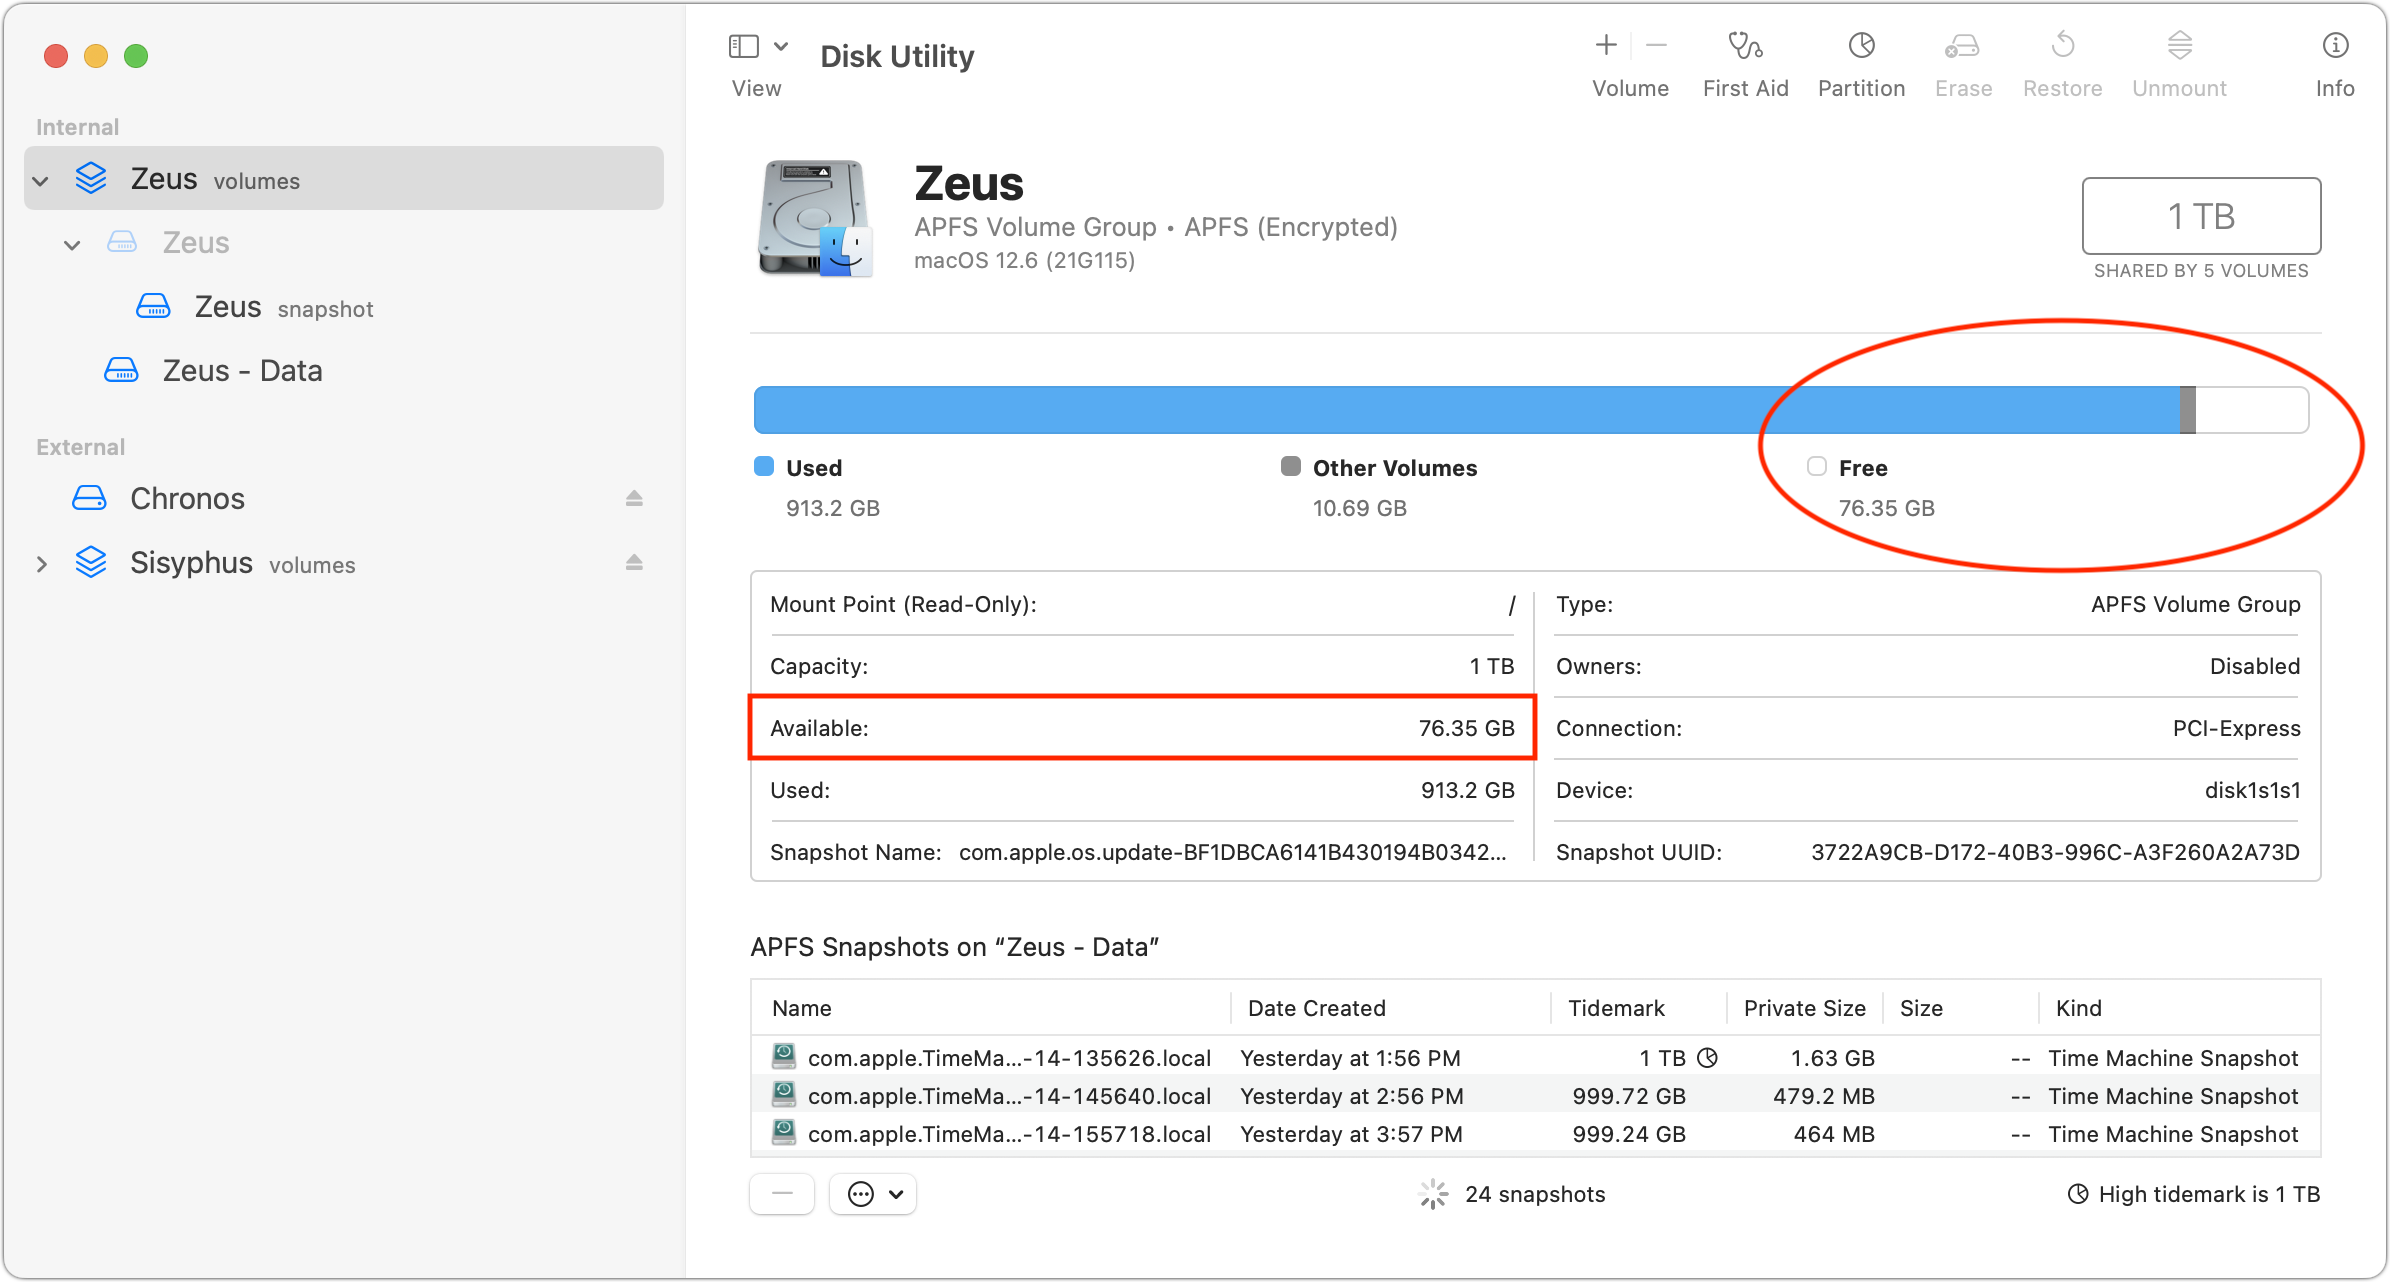 disk utility free space